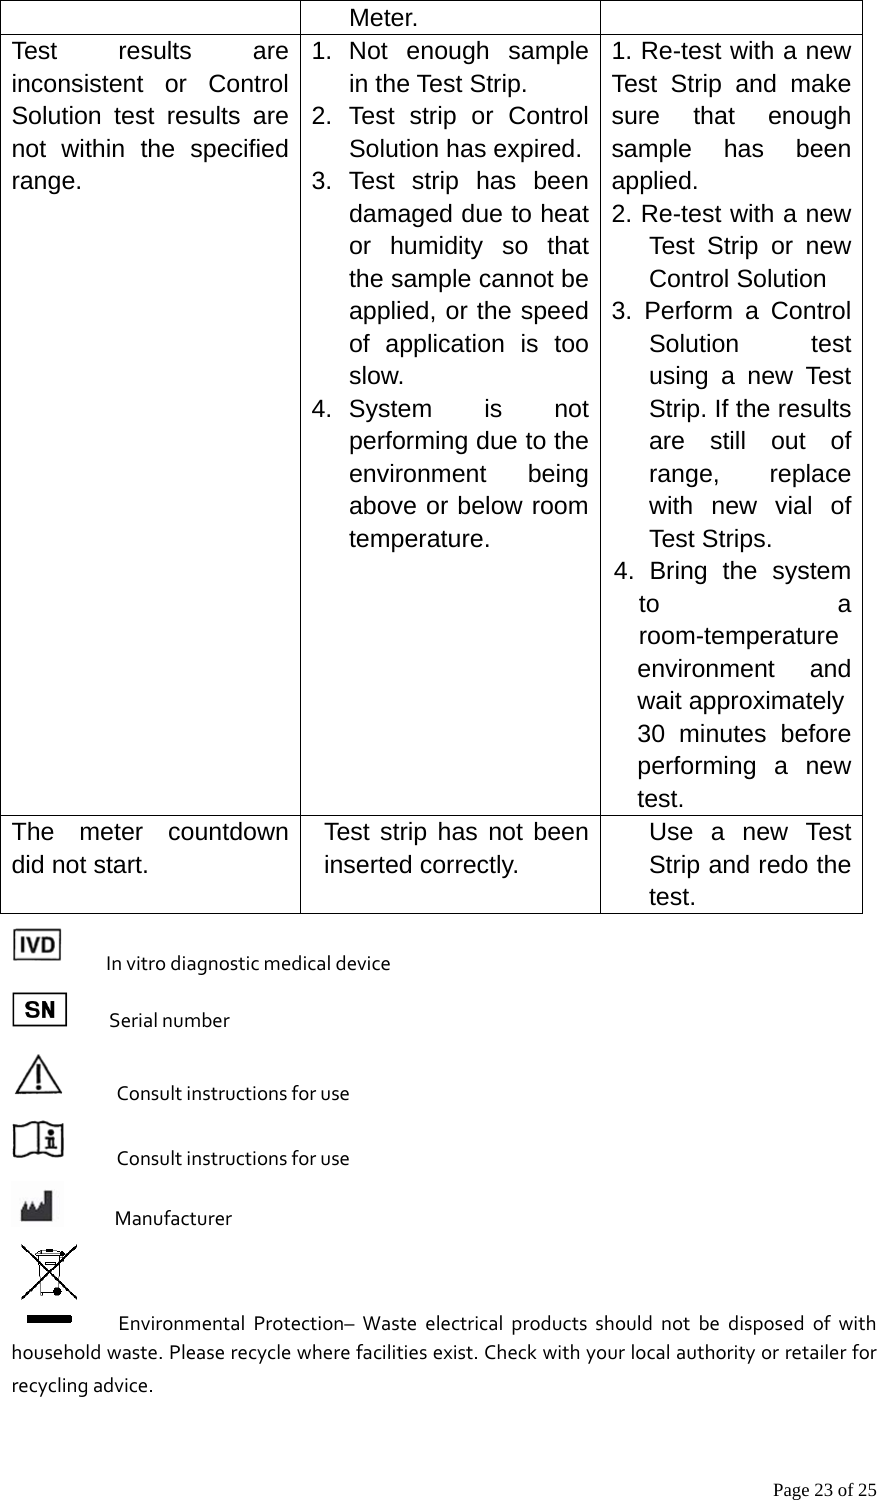 Page 23 of 25 Meter. Test results are inconsistent or Control Solution test results are not within the specified range. 1. Not enough sample in the Test Strip.   2. Test strip or Control Solution has expired.3. Test strip has been damaged due to heat or humidity so that the sample cannot be applied, or the speed of application is too slow.   4. System  is  not performing due to the environment being above or below room temperature. 1. Re-test with a new Test Strip and make sure that enough sample has been applied. 2. Re-test with a new Test Strip or new Control Solution 3. Perform a Control Solution test using a new Test Strip. If the results are still out of range, replace with new vial of Test Strips. 4. Bring the system to a room-temperature environment and wait approximately 30 minutes before performing a new test. The meter countdown did not start.  Test strip has not been inserted correctly.    Use  a  new  Test Strip and redo the test. InvitrodiagnosticmedicaldeviceSerialnumberConsultinstructionsforuseConsultinstructionsforuseManufacturerEnvironmentalProtection–Wasteelectricalproductsshouldnotbedisposedofwithhouseholdwaste.Pleaserecyclewherefacilitiesexist.Checkwithyourlocalauthorityorretailerforrecyclingadvice.